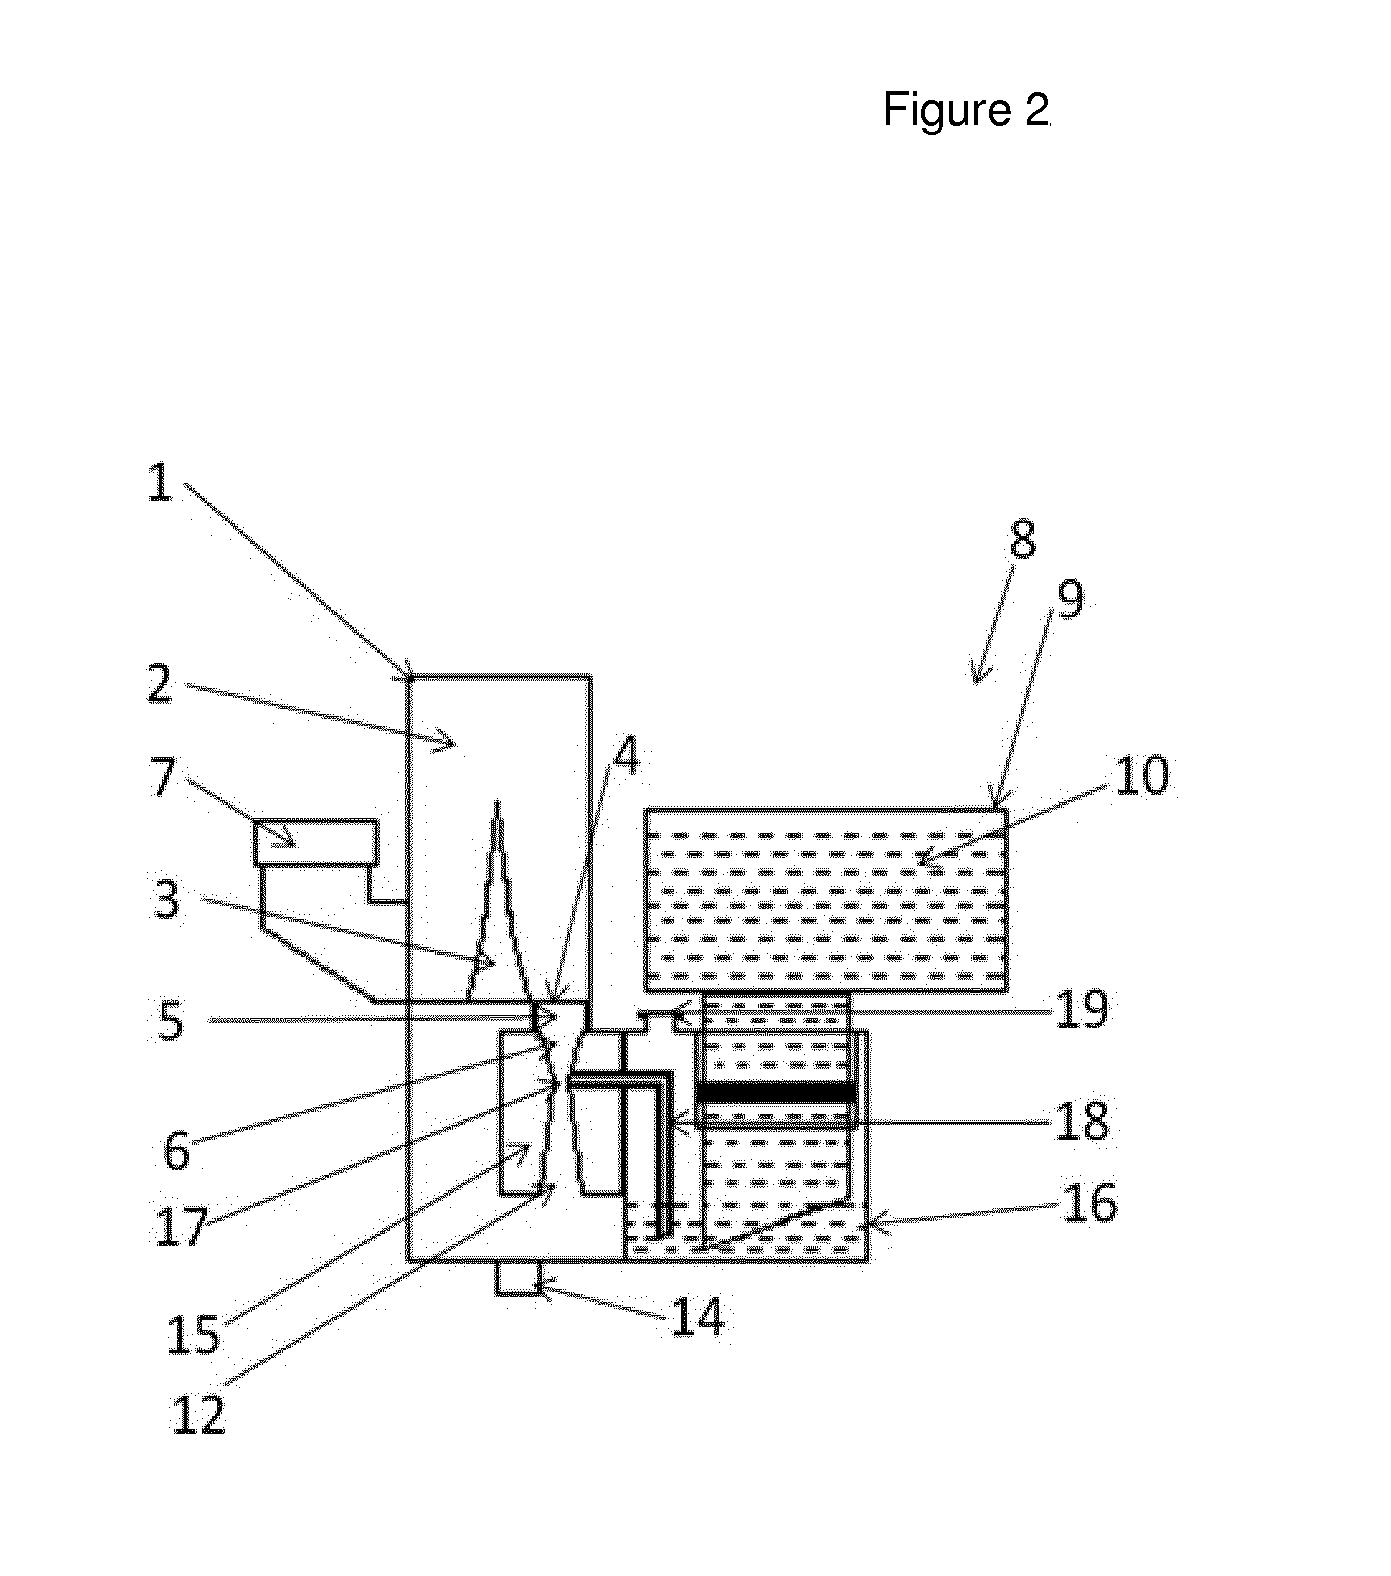 Dietary supplement dosing device